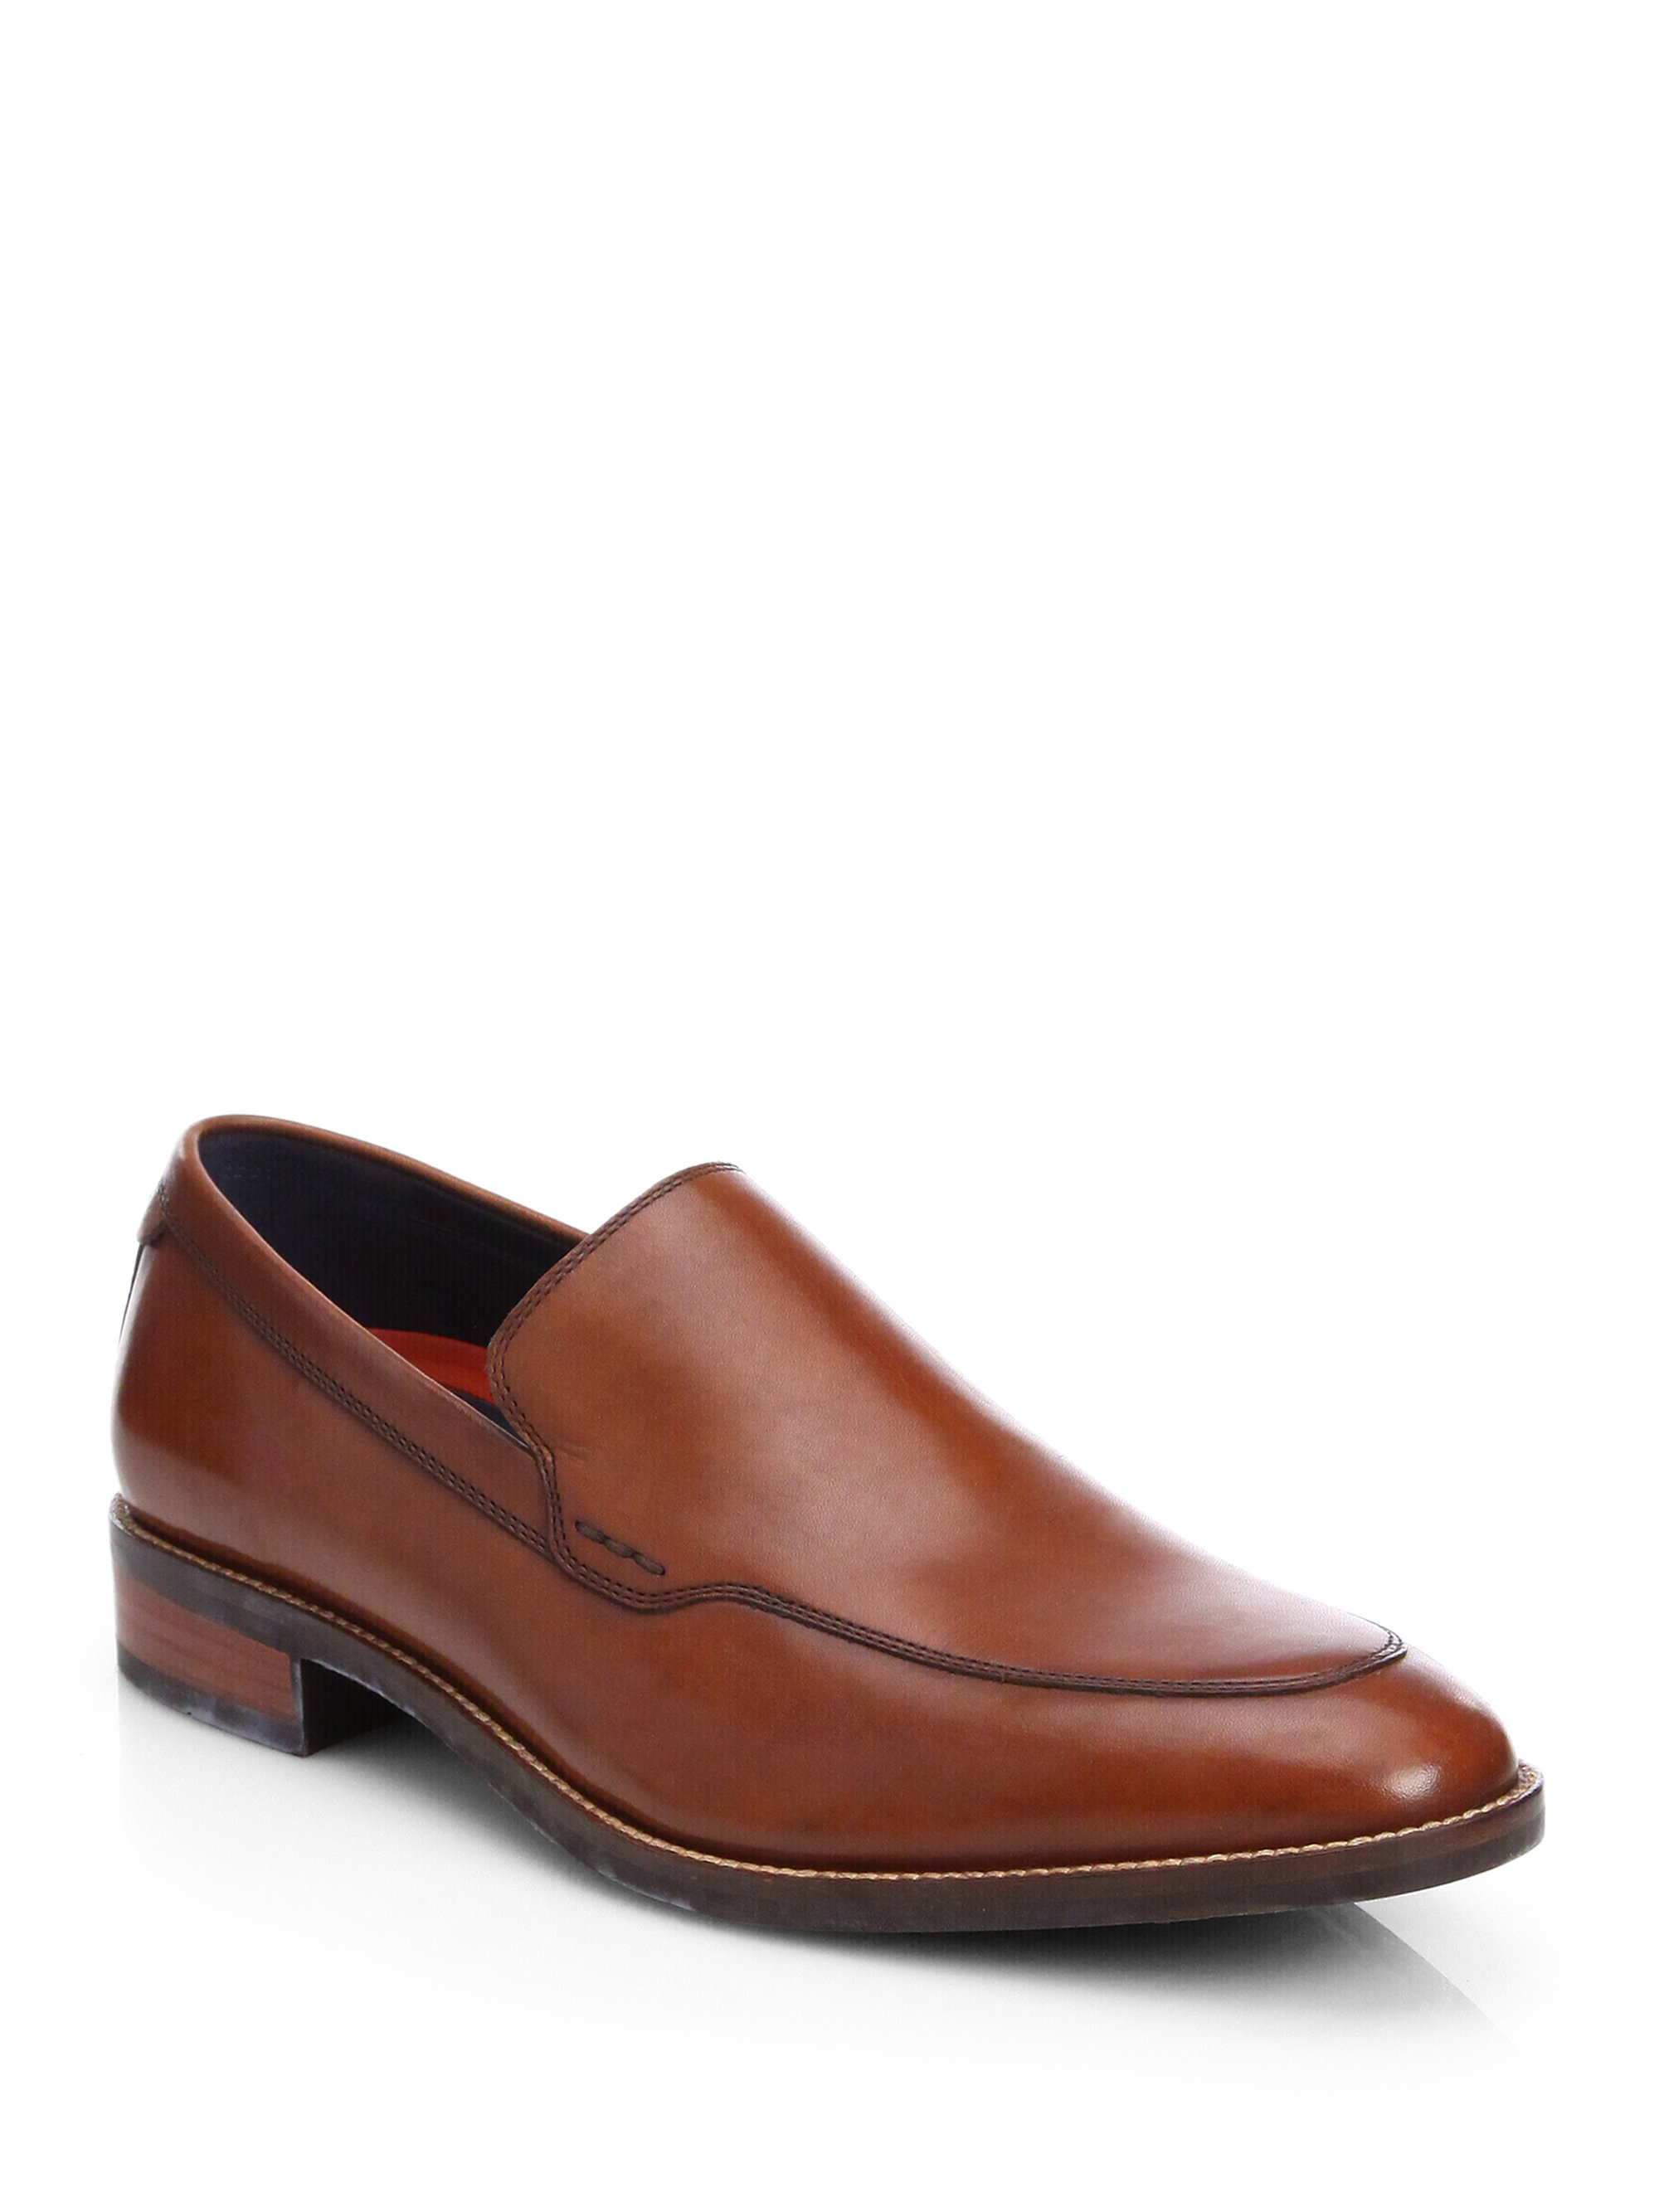 Cole Haan Leather Slip On Dress Loafers In Brown For Men Lyst 7210